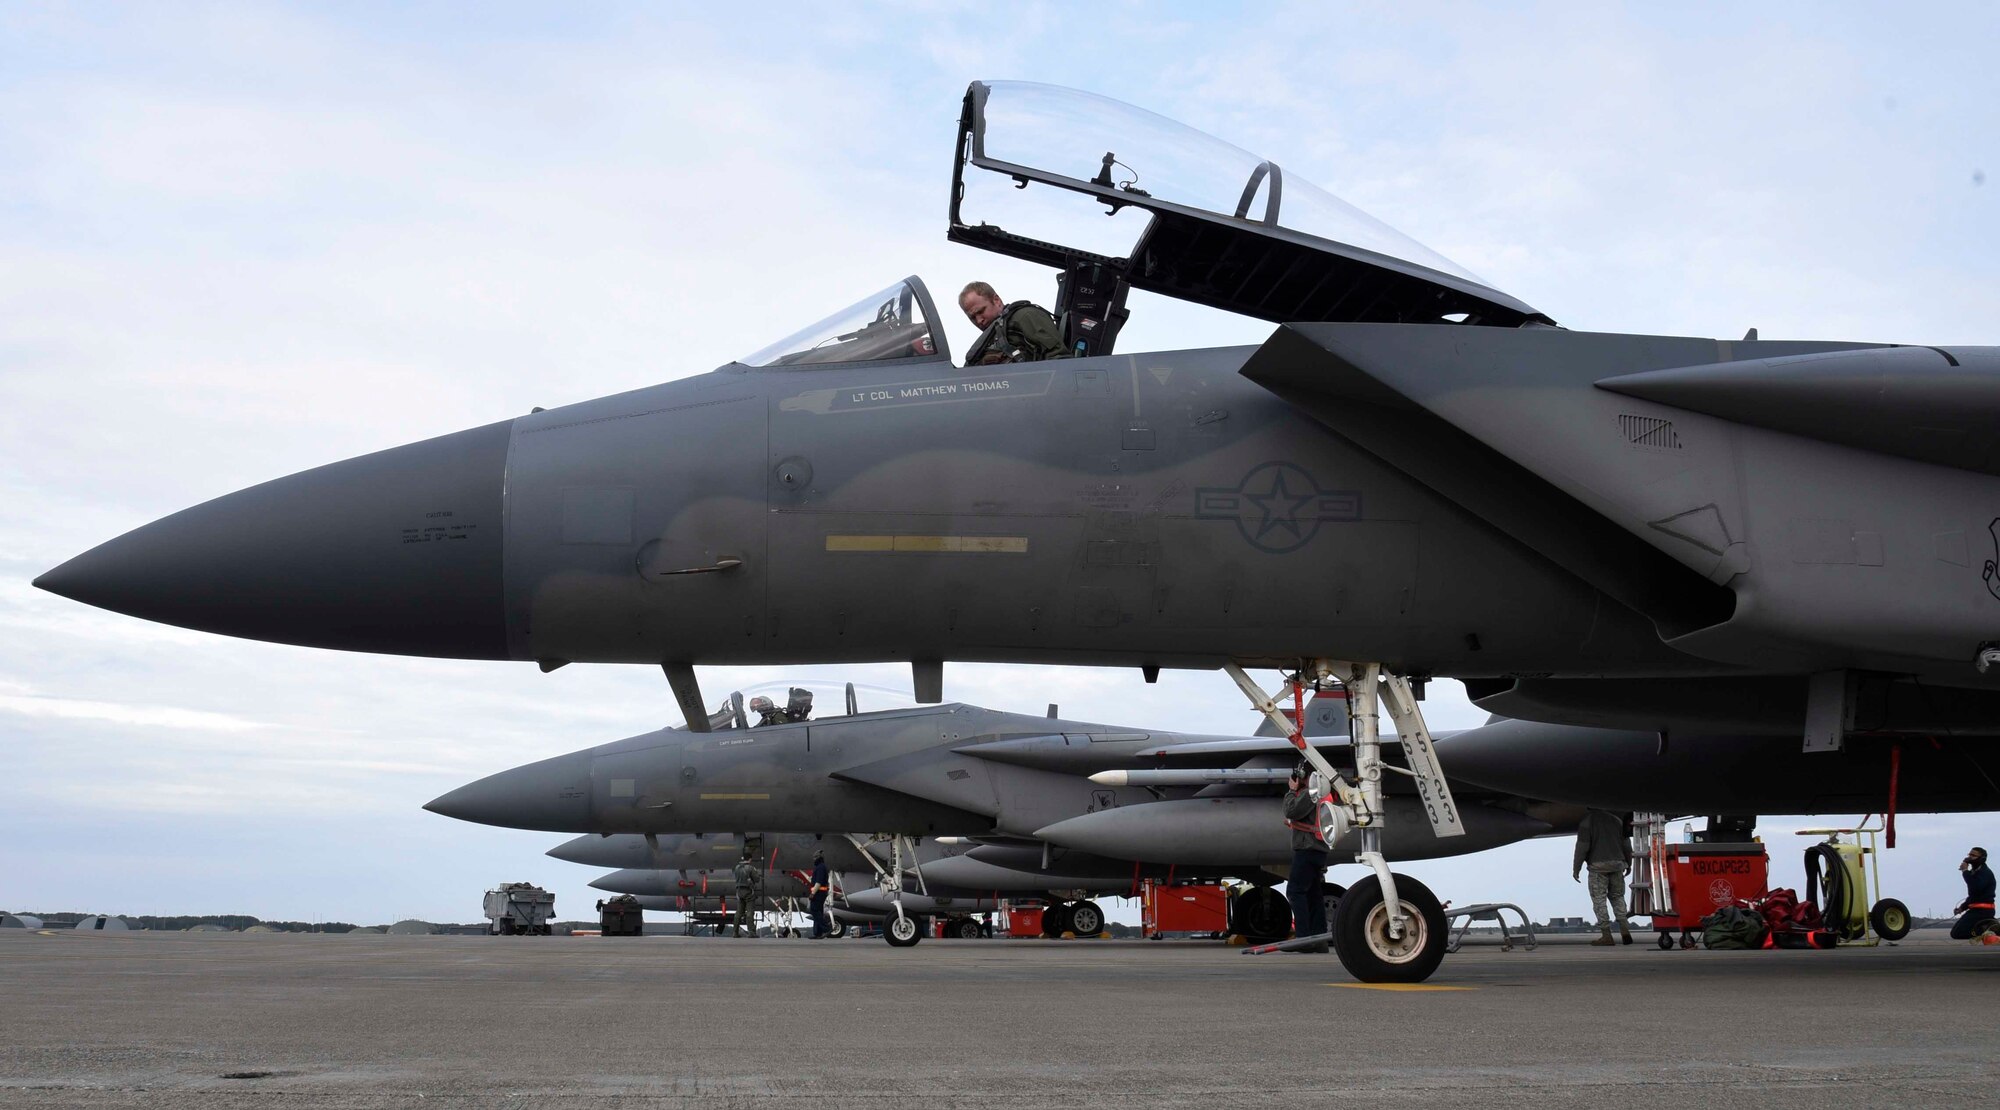 U.S. Air Force Capt. Brian Anderson, a 67th Fighter Squadron pilot, prepares for a flight at Misawa Air Base, Japan, Dec. 15, 2015. Pilots demonstrated interoperability during this Aviation Training Relocation by conducting fighter aircraft combat training with their Japan Air Self-Defense Force counterparts. (U.S. Air Force photo/Airman 1st Class Jordyn Fetter)